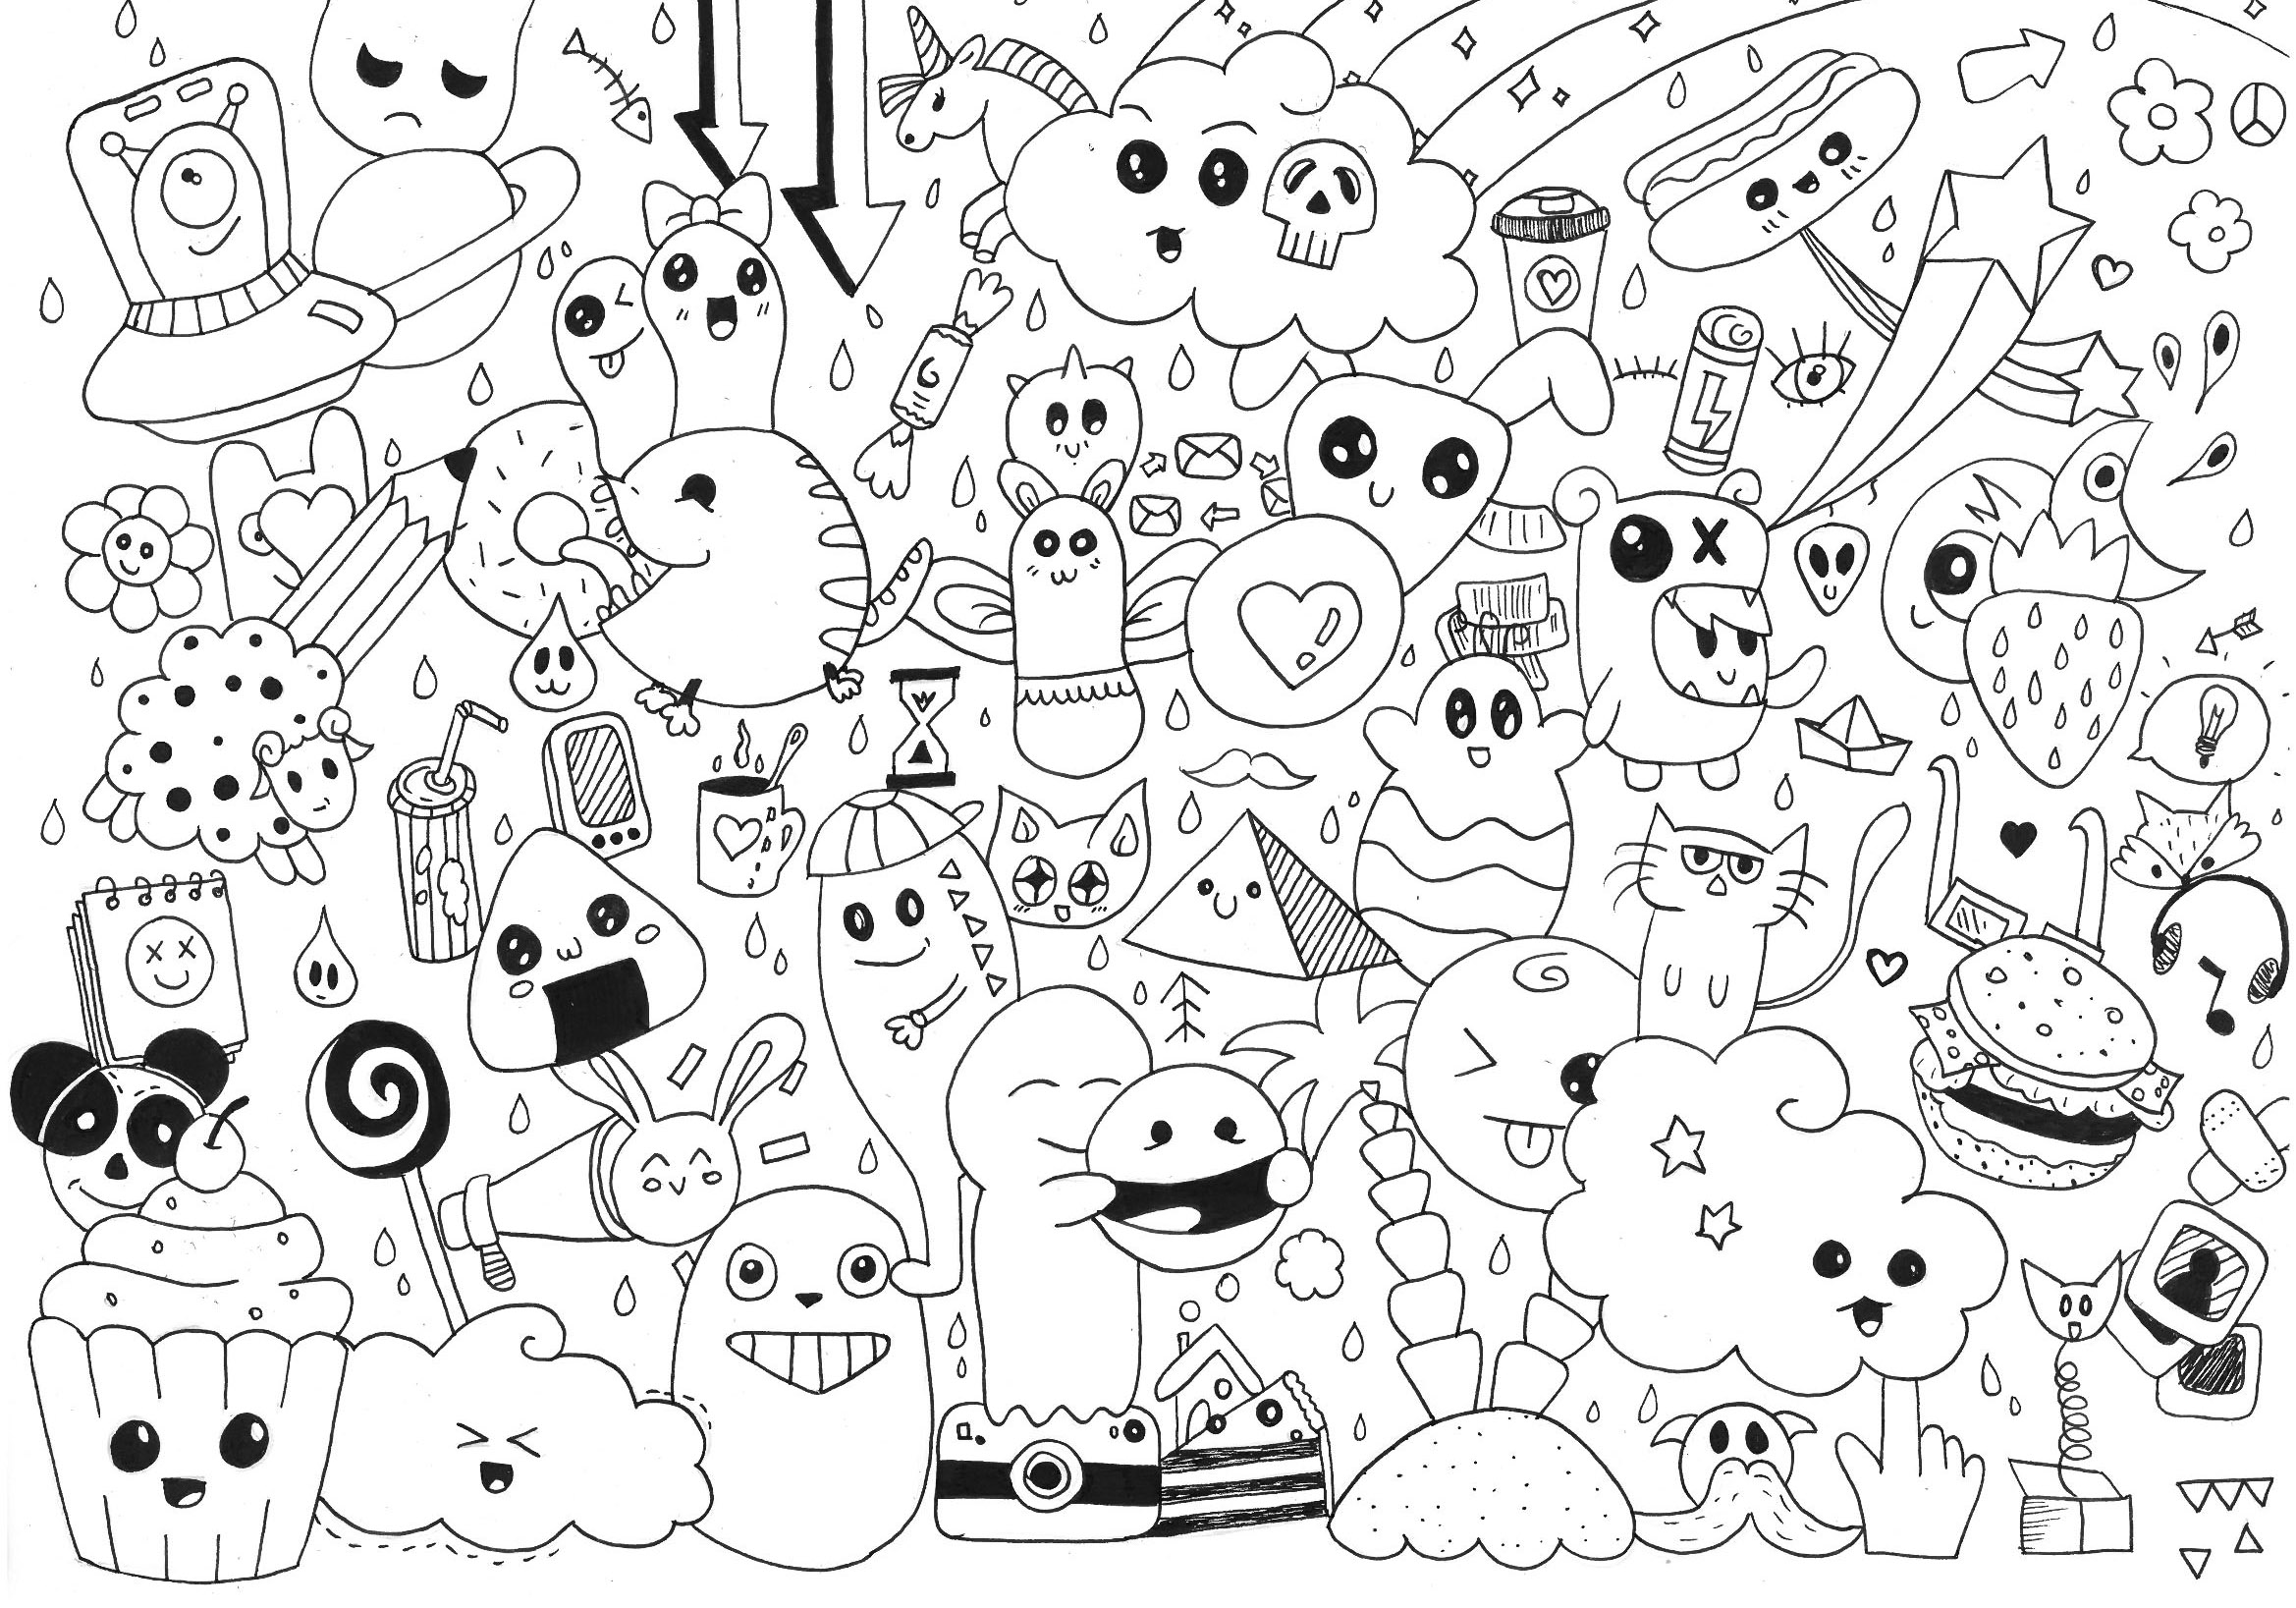 doodle-art-to-print-for-free-doodle-art-kids-coloring-pages